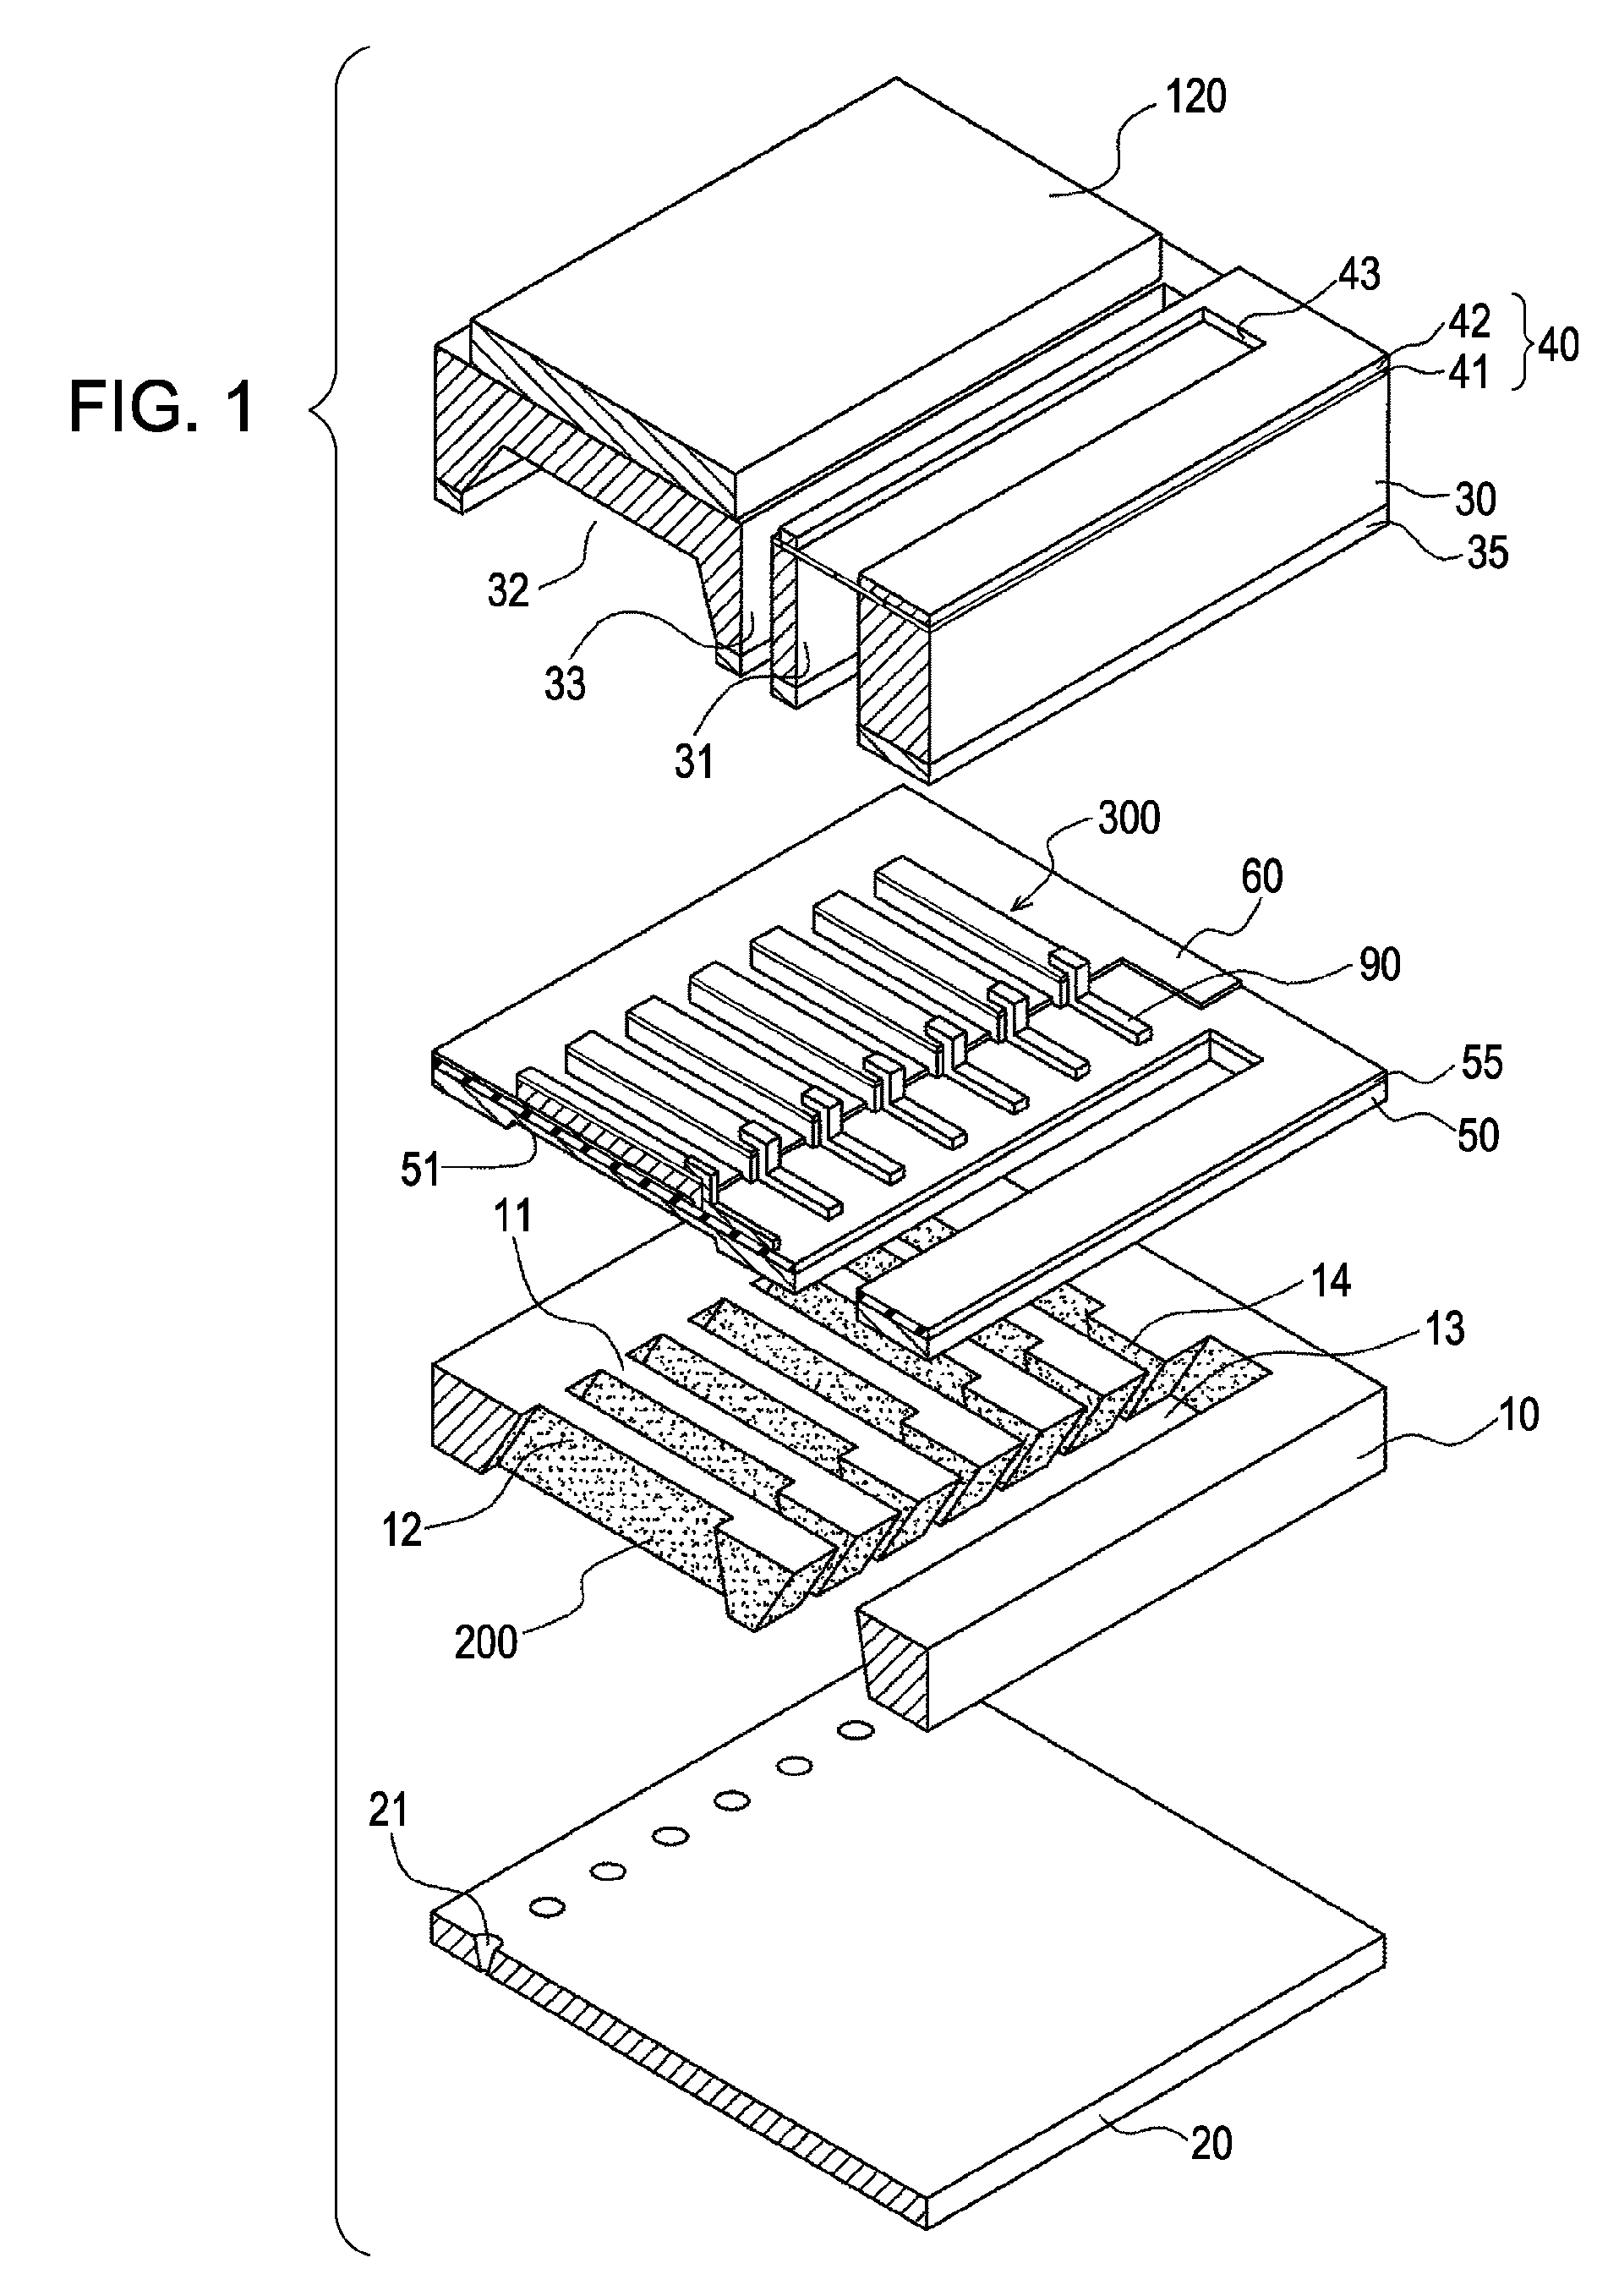 Liquid ejecting head, method of producing the same, and liquid ejecting apparatus